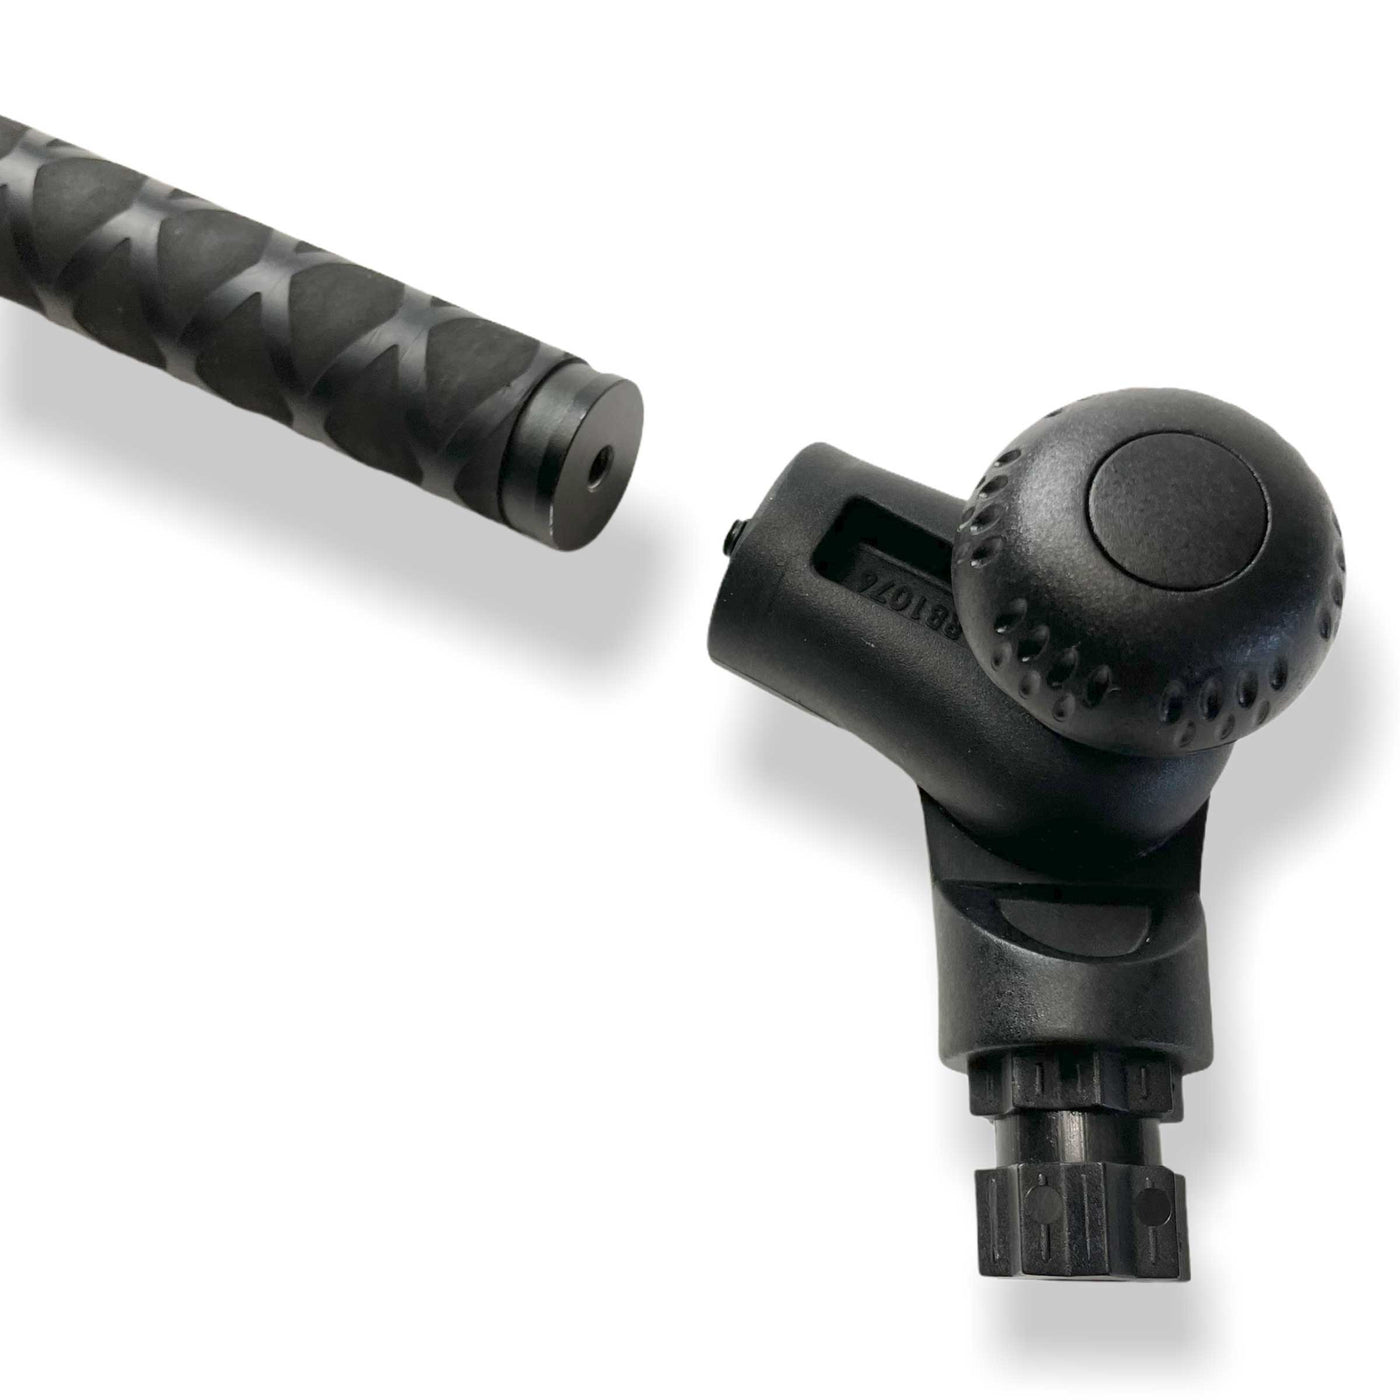 3rdPersonView Patented Connector for Insta360 Invisible selfie stick